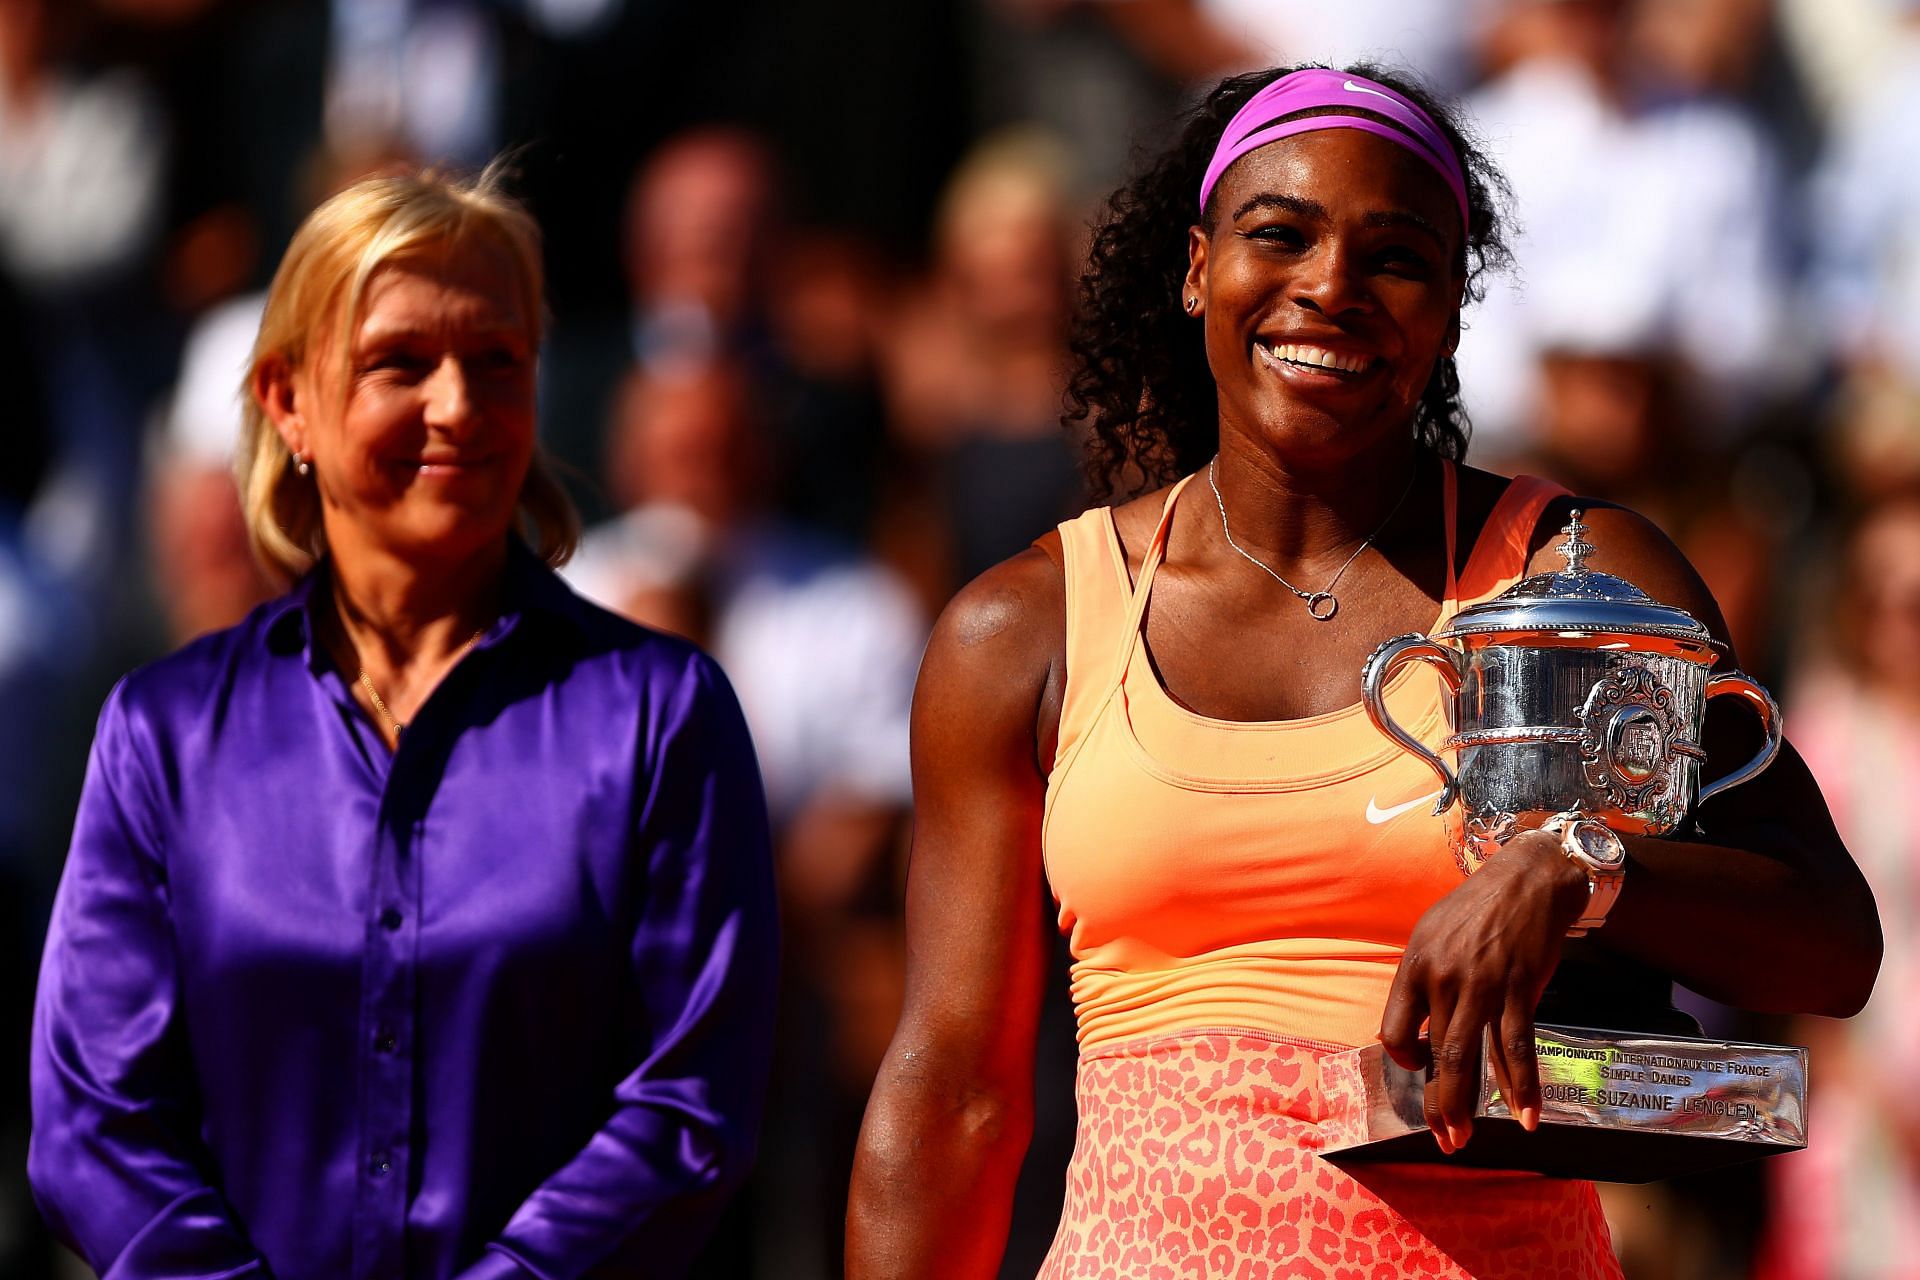 Martina Navratilova joined Serena Williams in expressing her sorrow at the shooting incident.